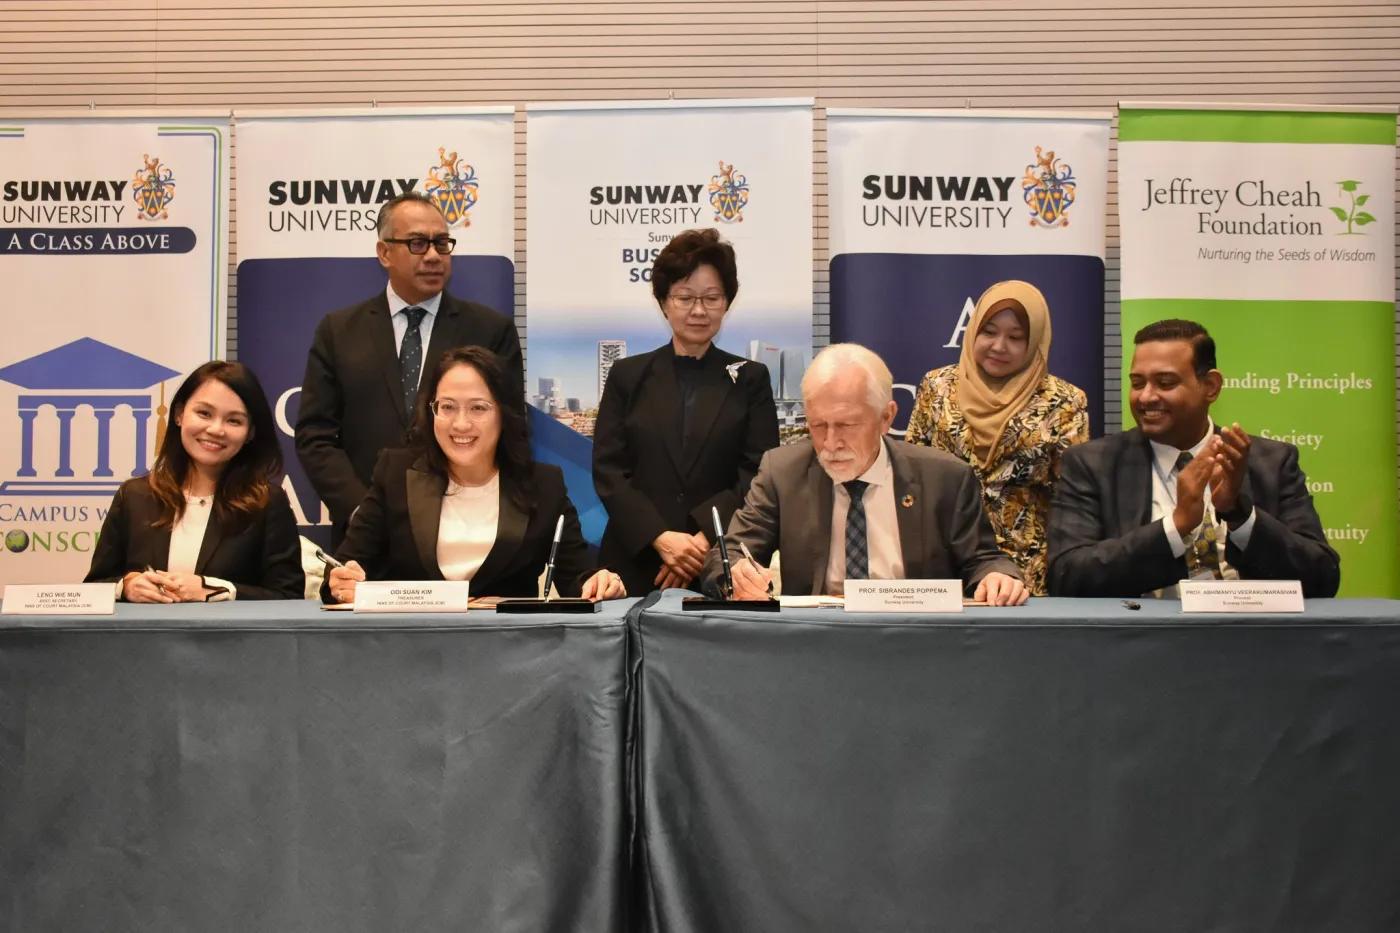 Sunway University Signs MoU with ICM